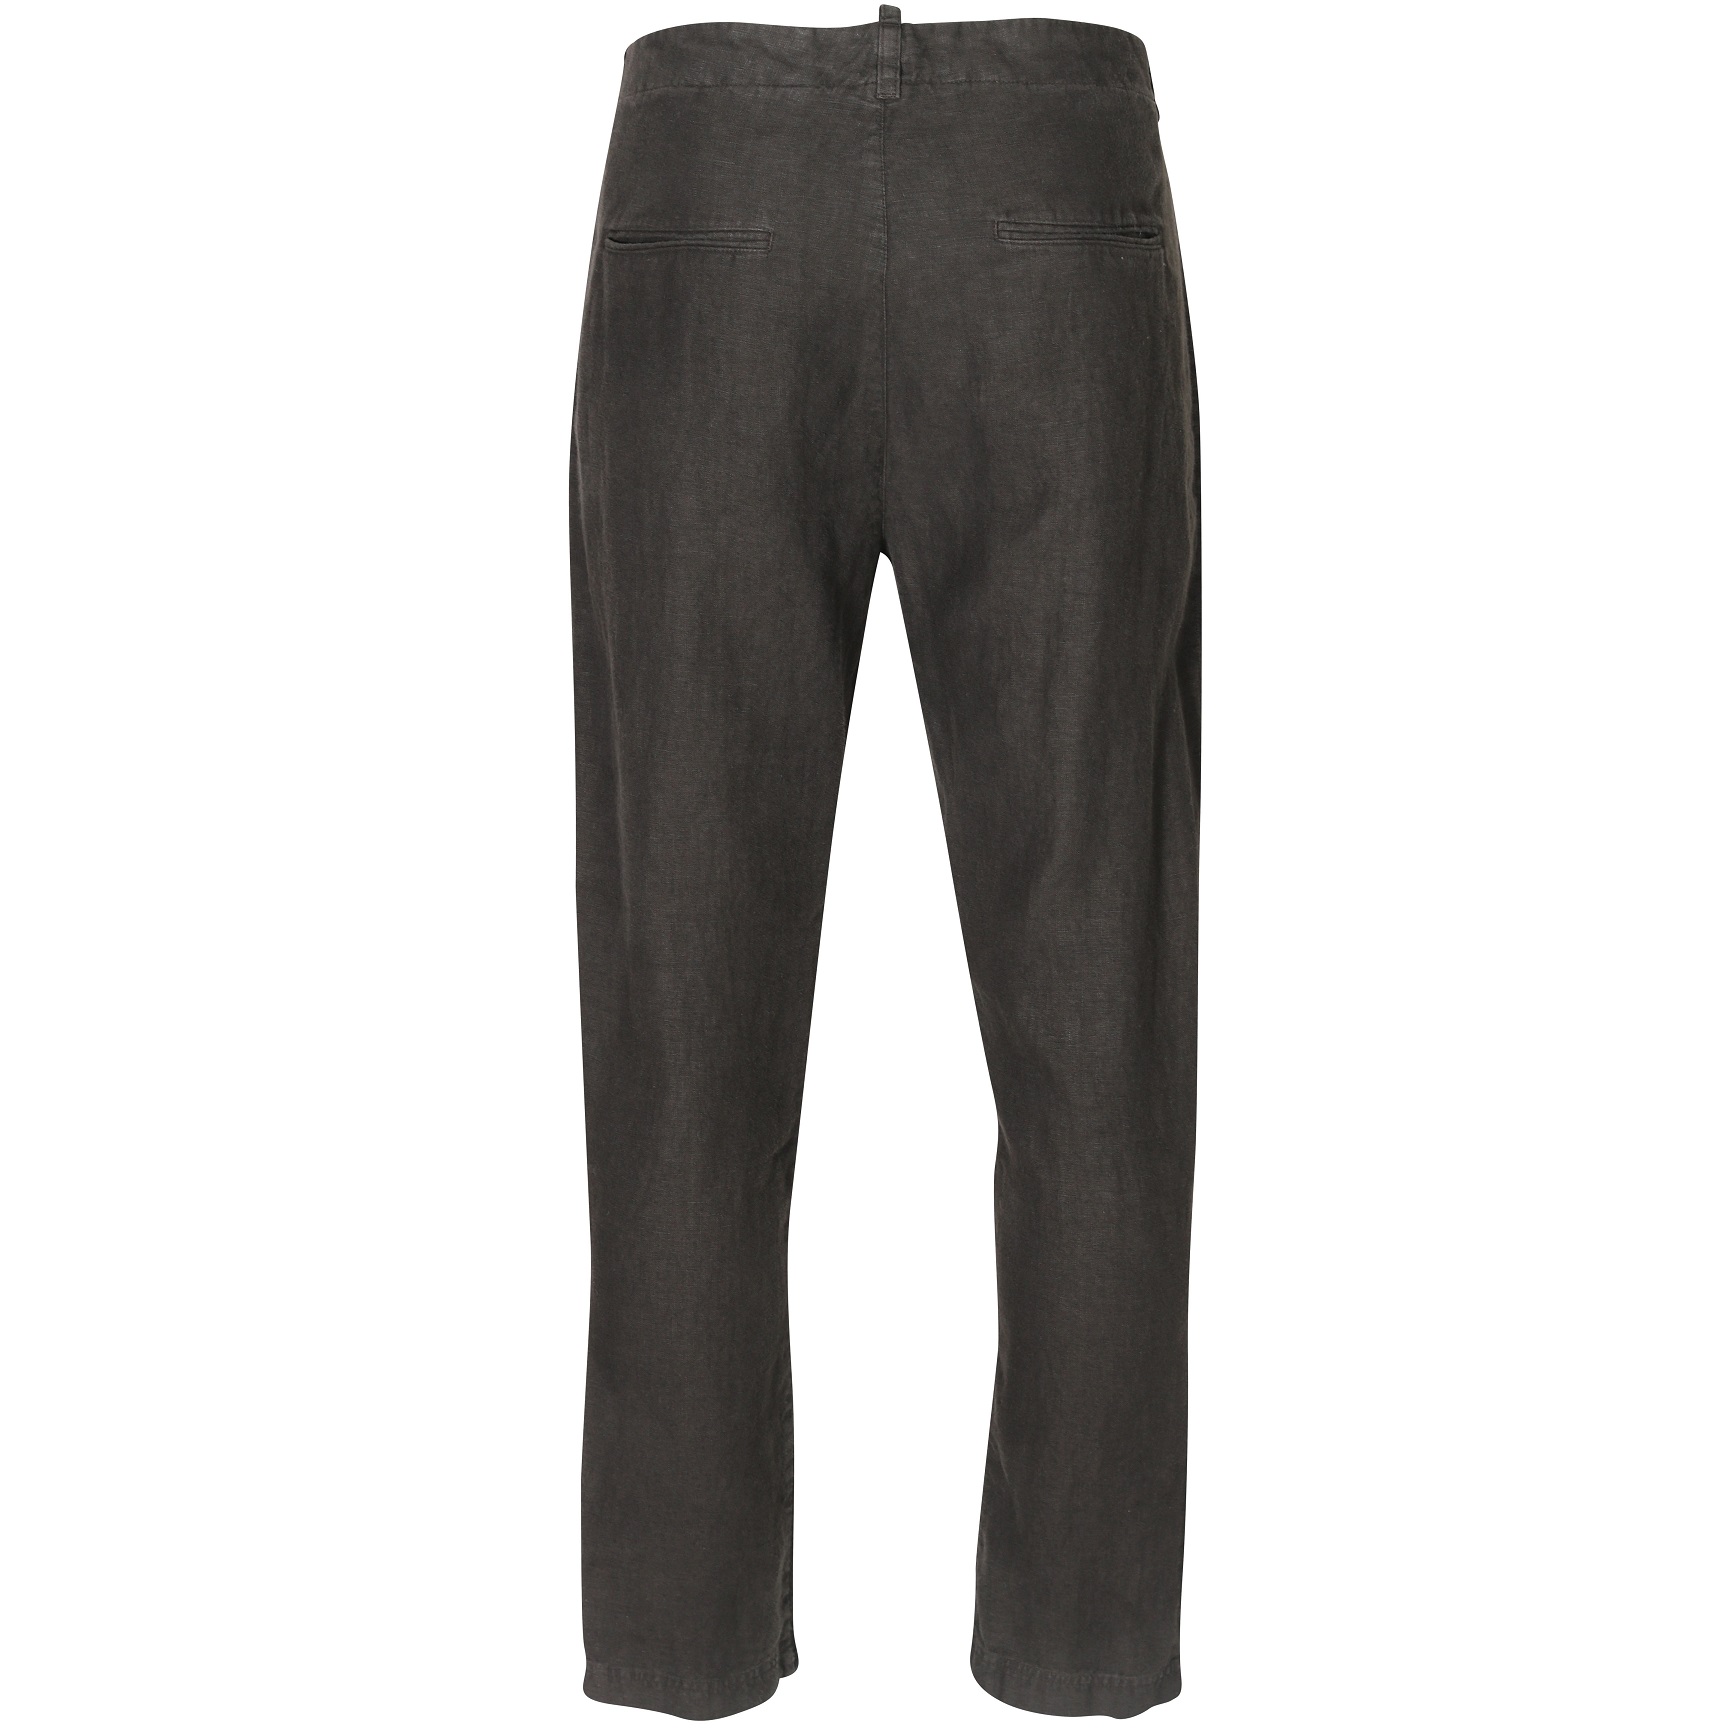 HANNES ROETHER Linen Pant in Dark Olive XXL